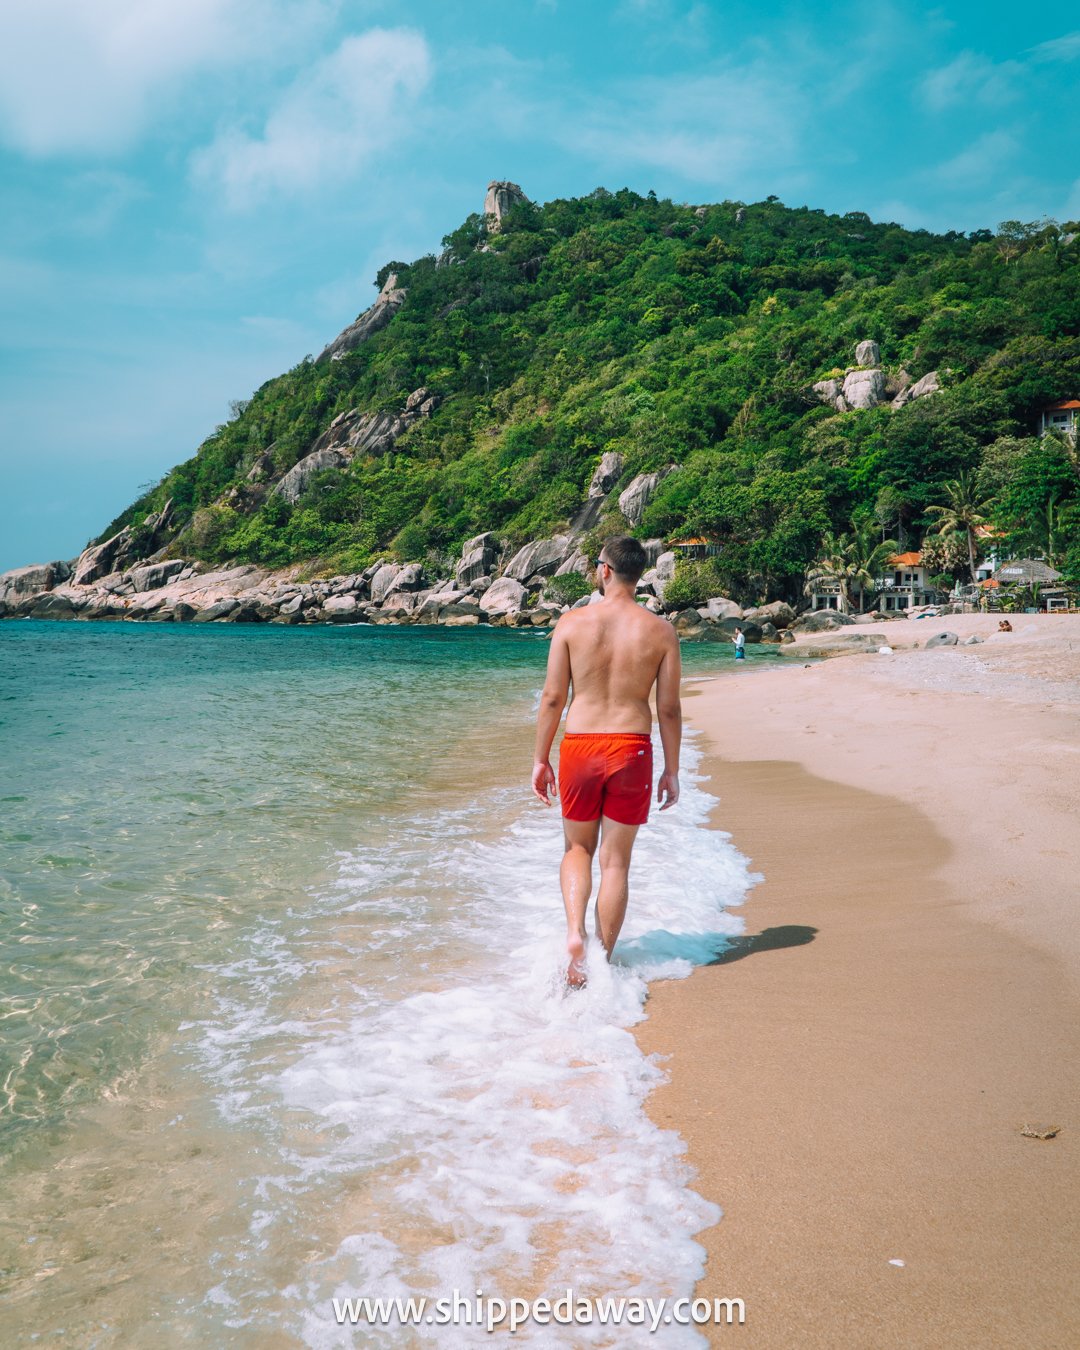 Walking on the beach in Tanote Bay, Koh Tao, Thailand